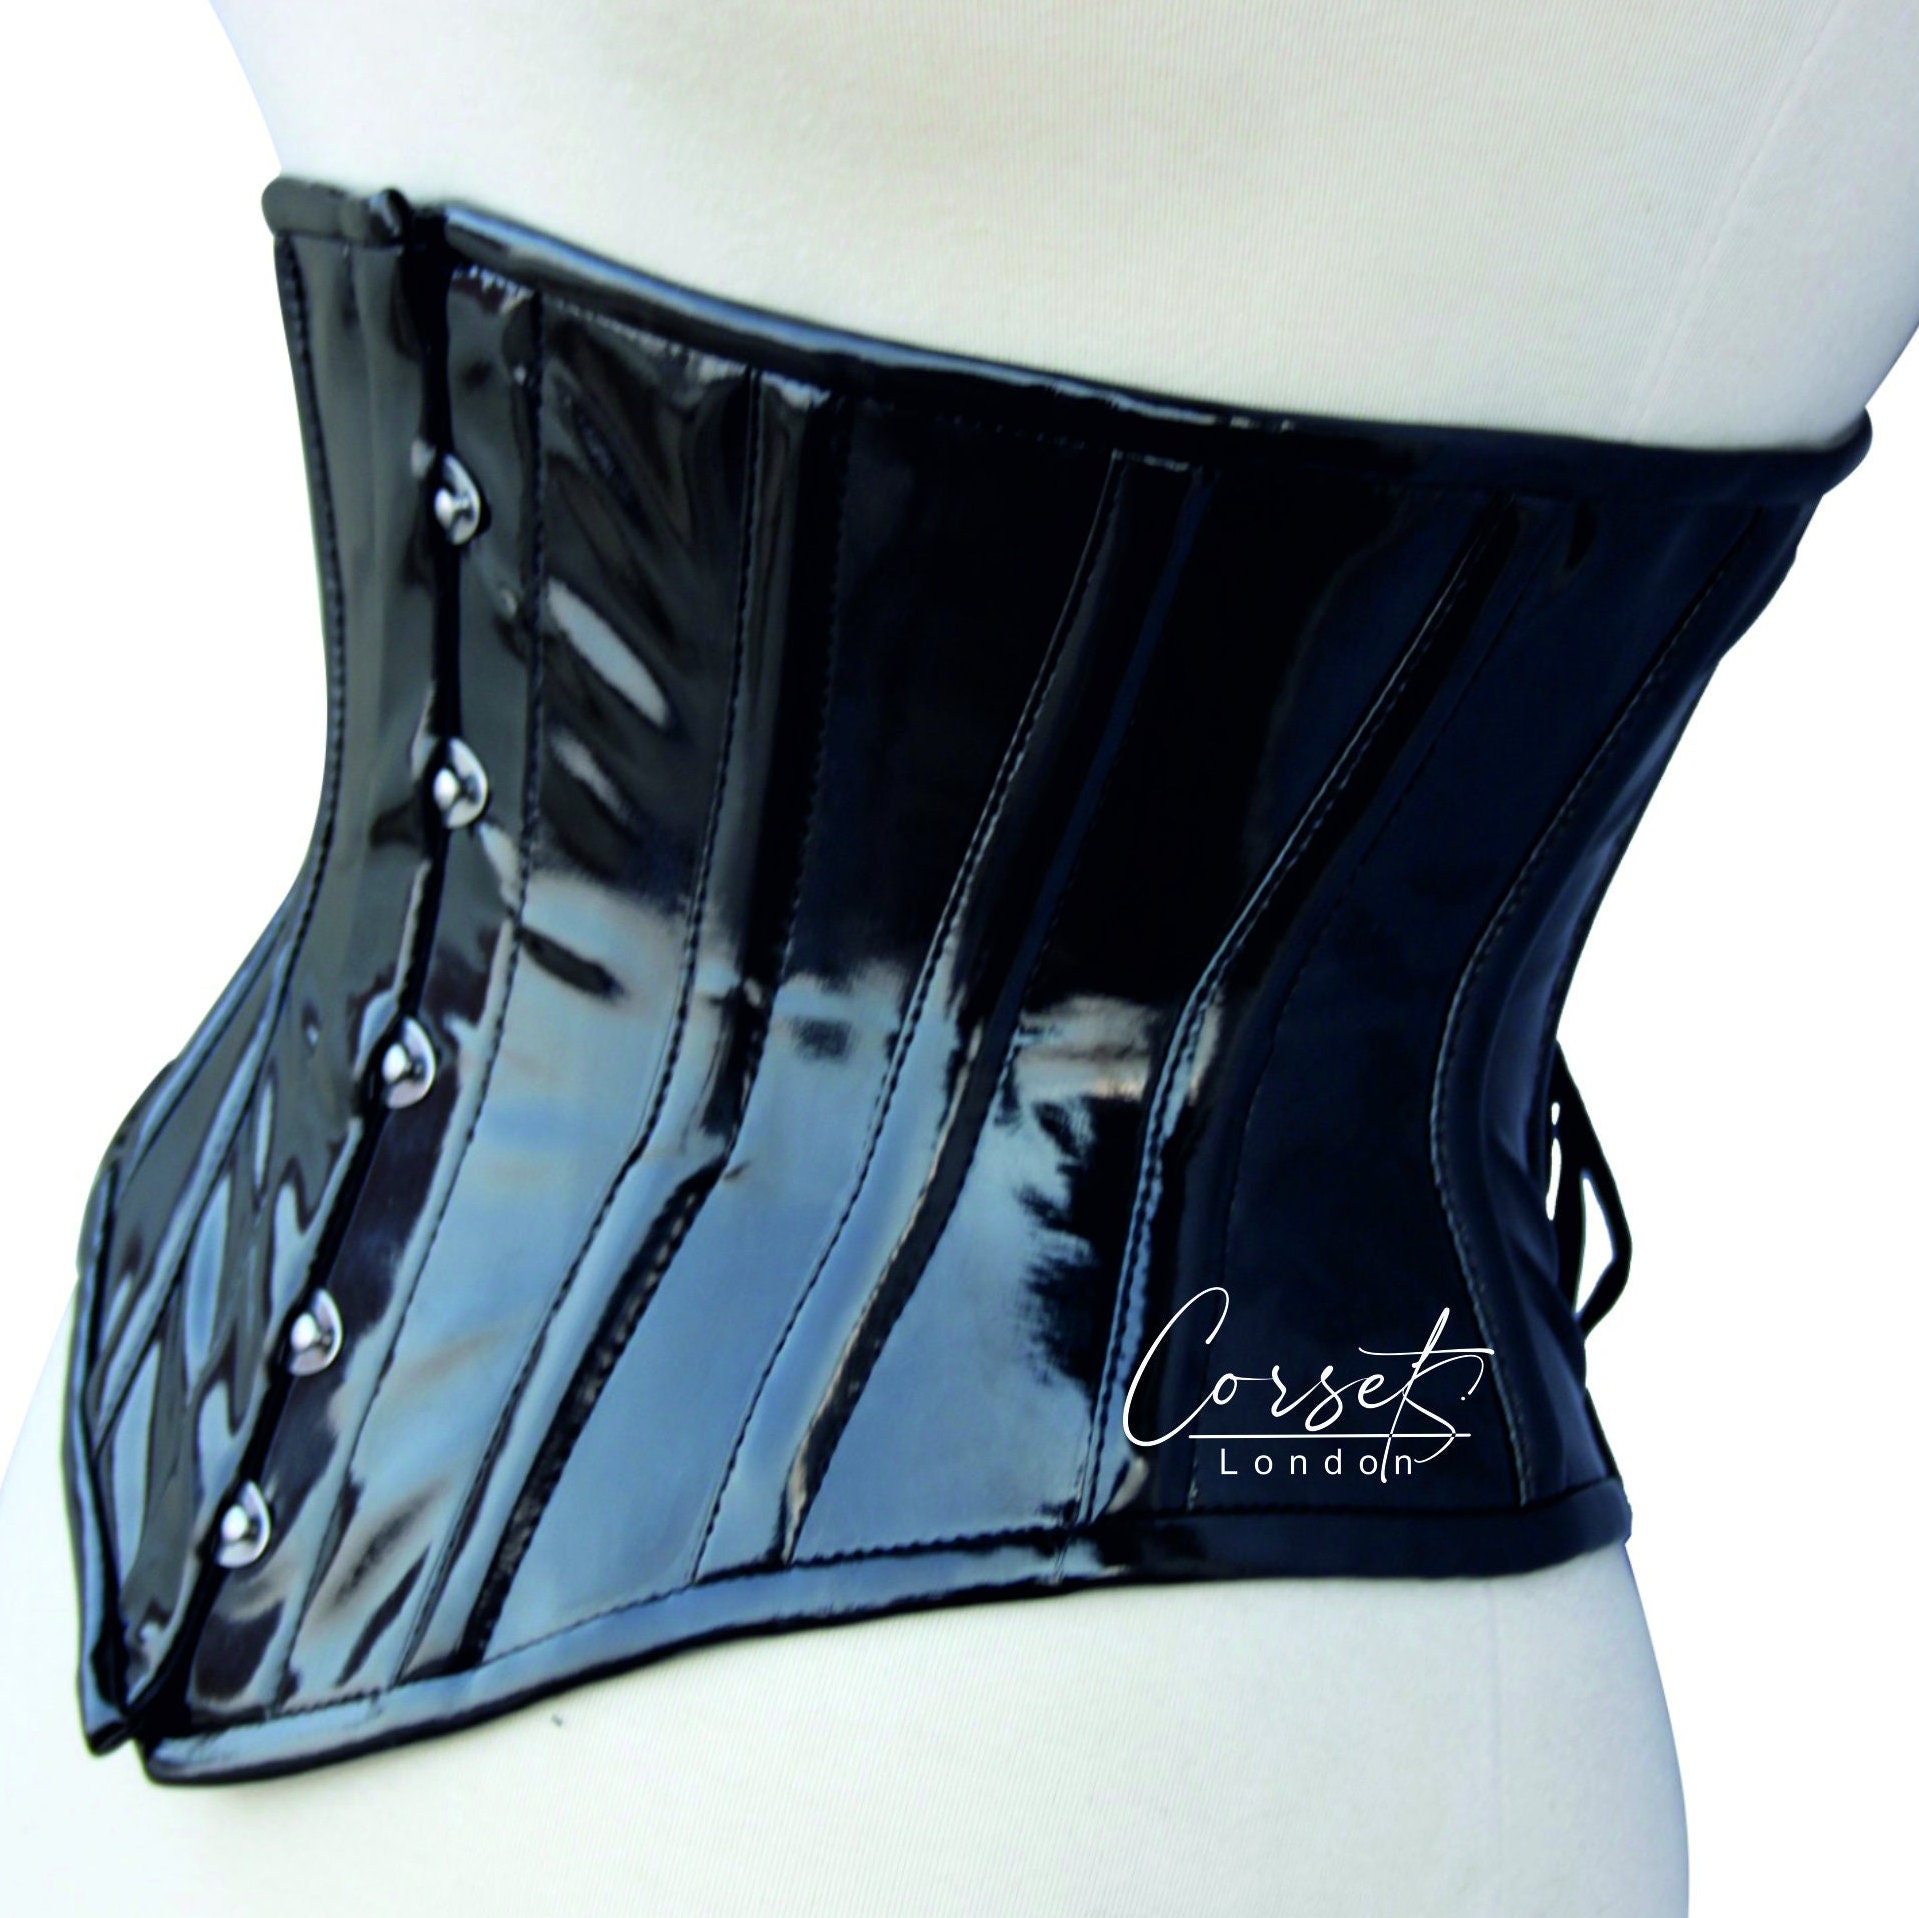 Artifice Products - Clear PVC and Lace Underbust Corset – Artifice Clothing